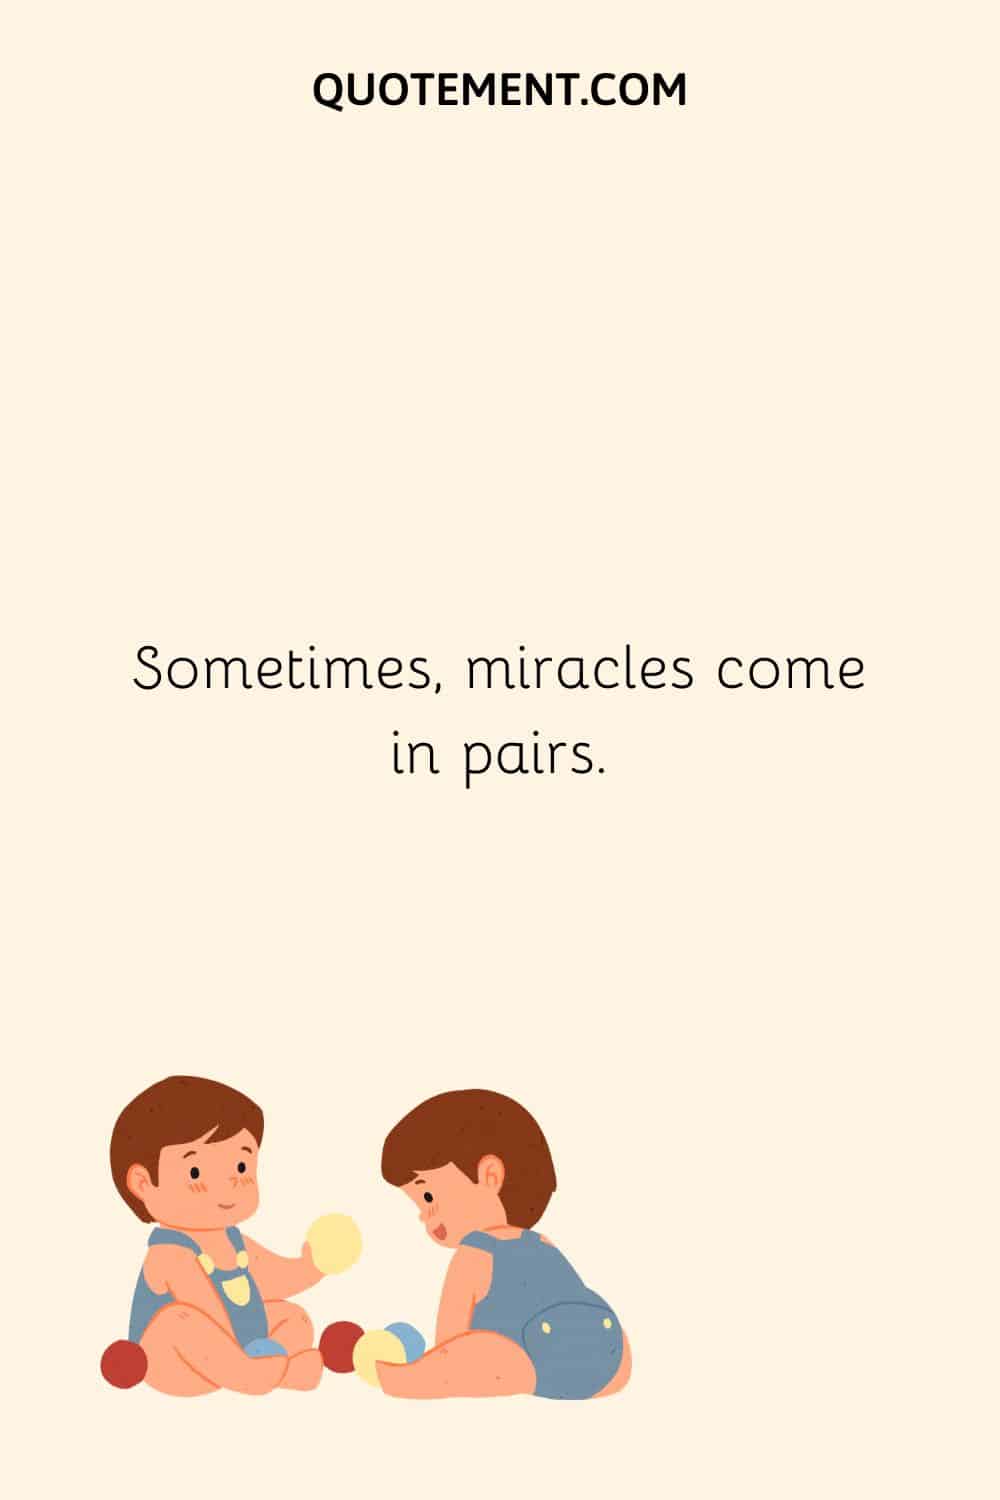 Sometimes, miracles come in pairs